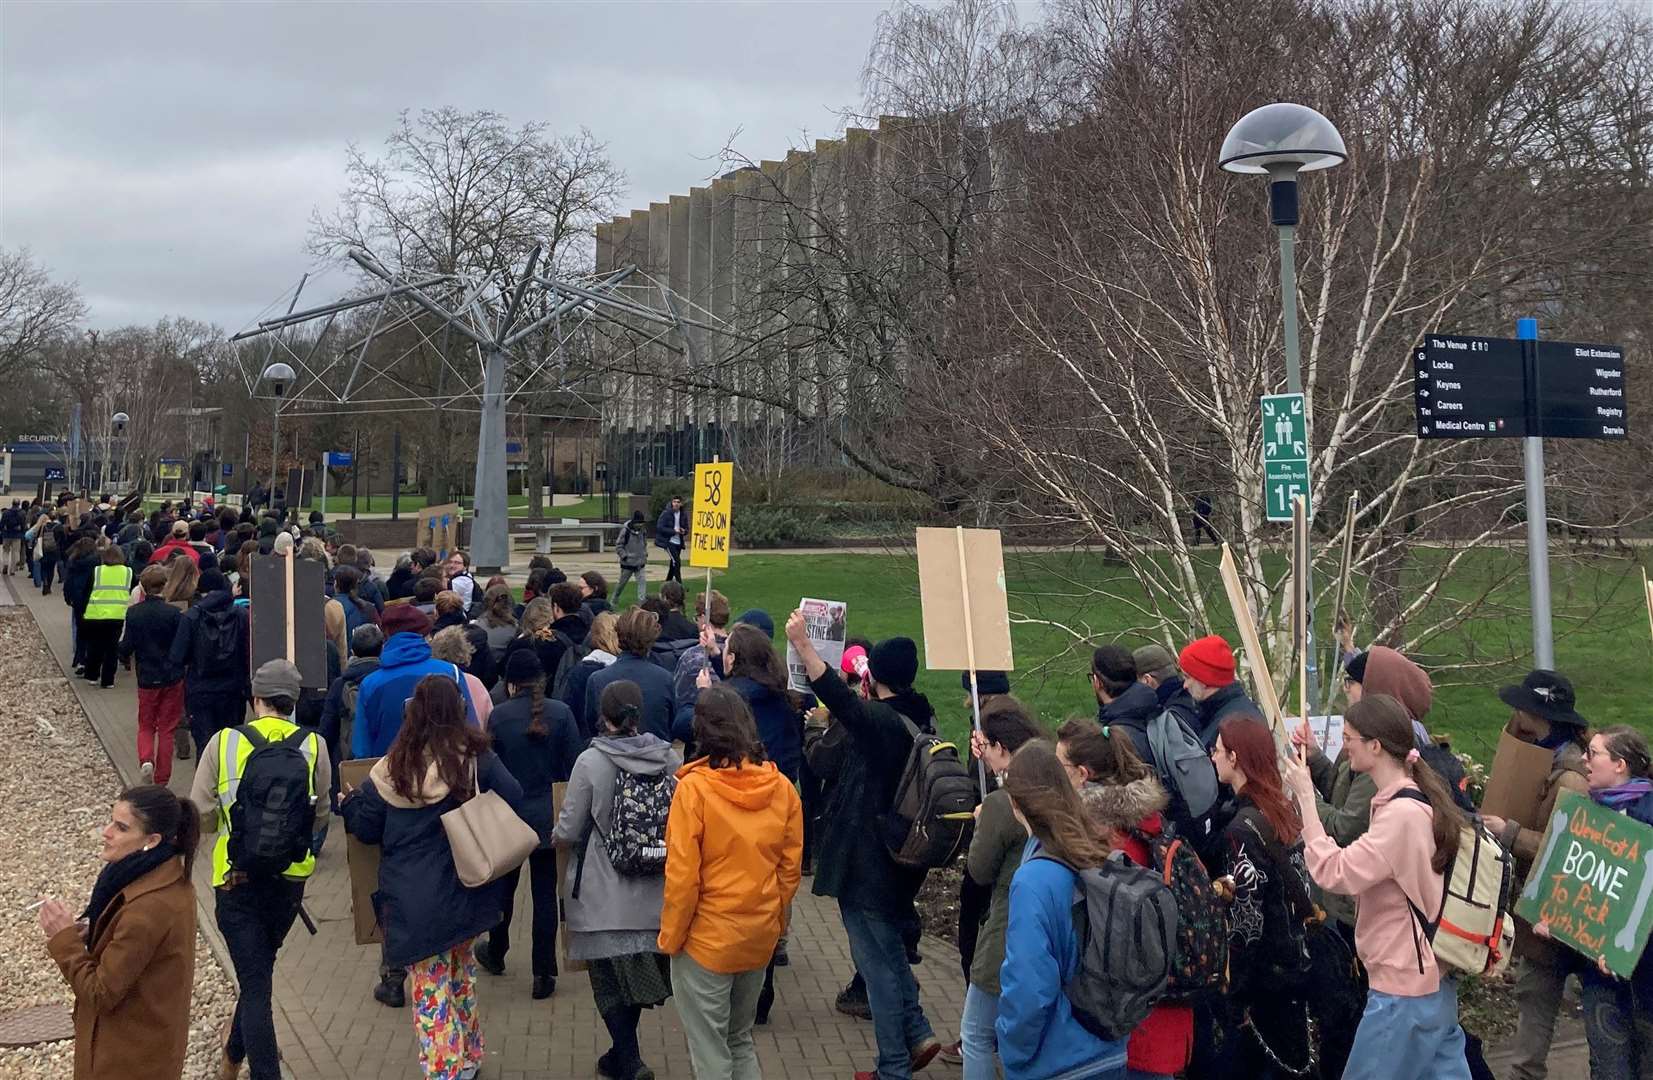 University of Kent students and staff protests over proposed course cuts and job losses